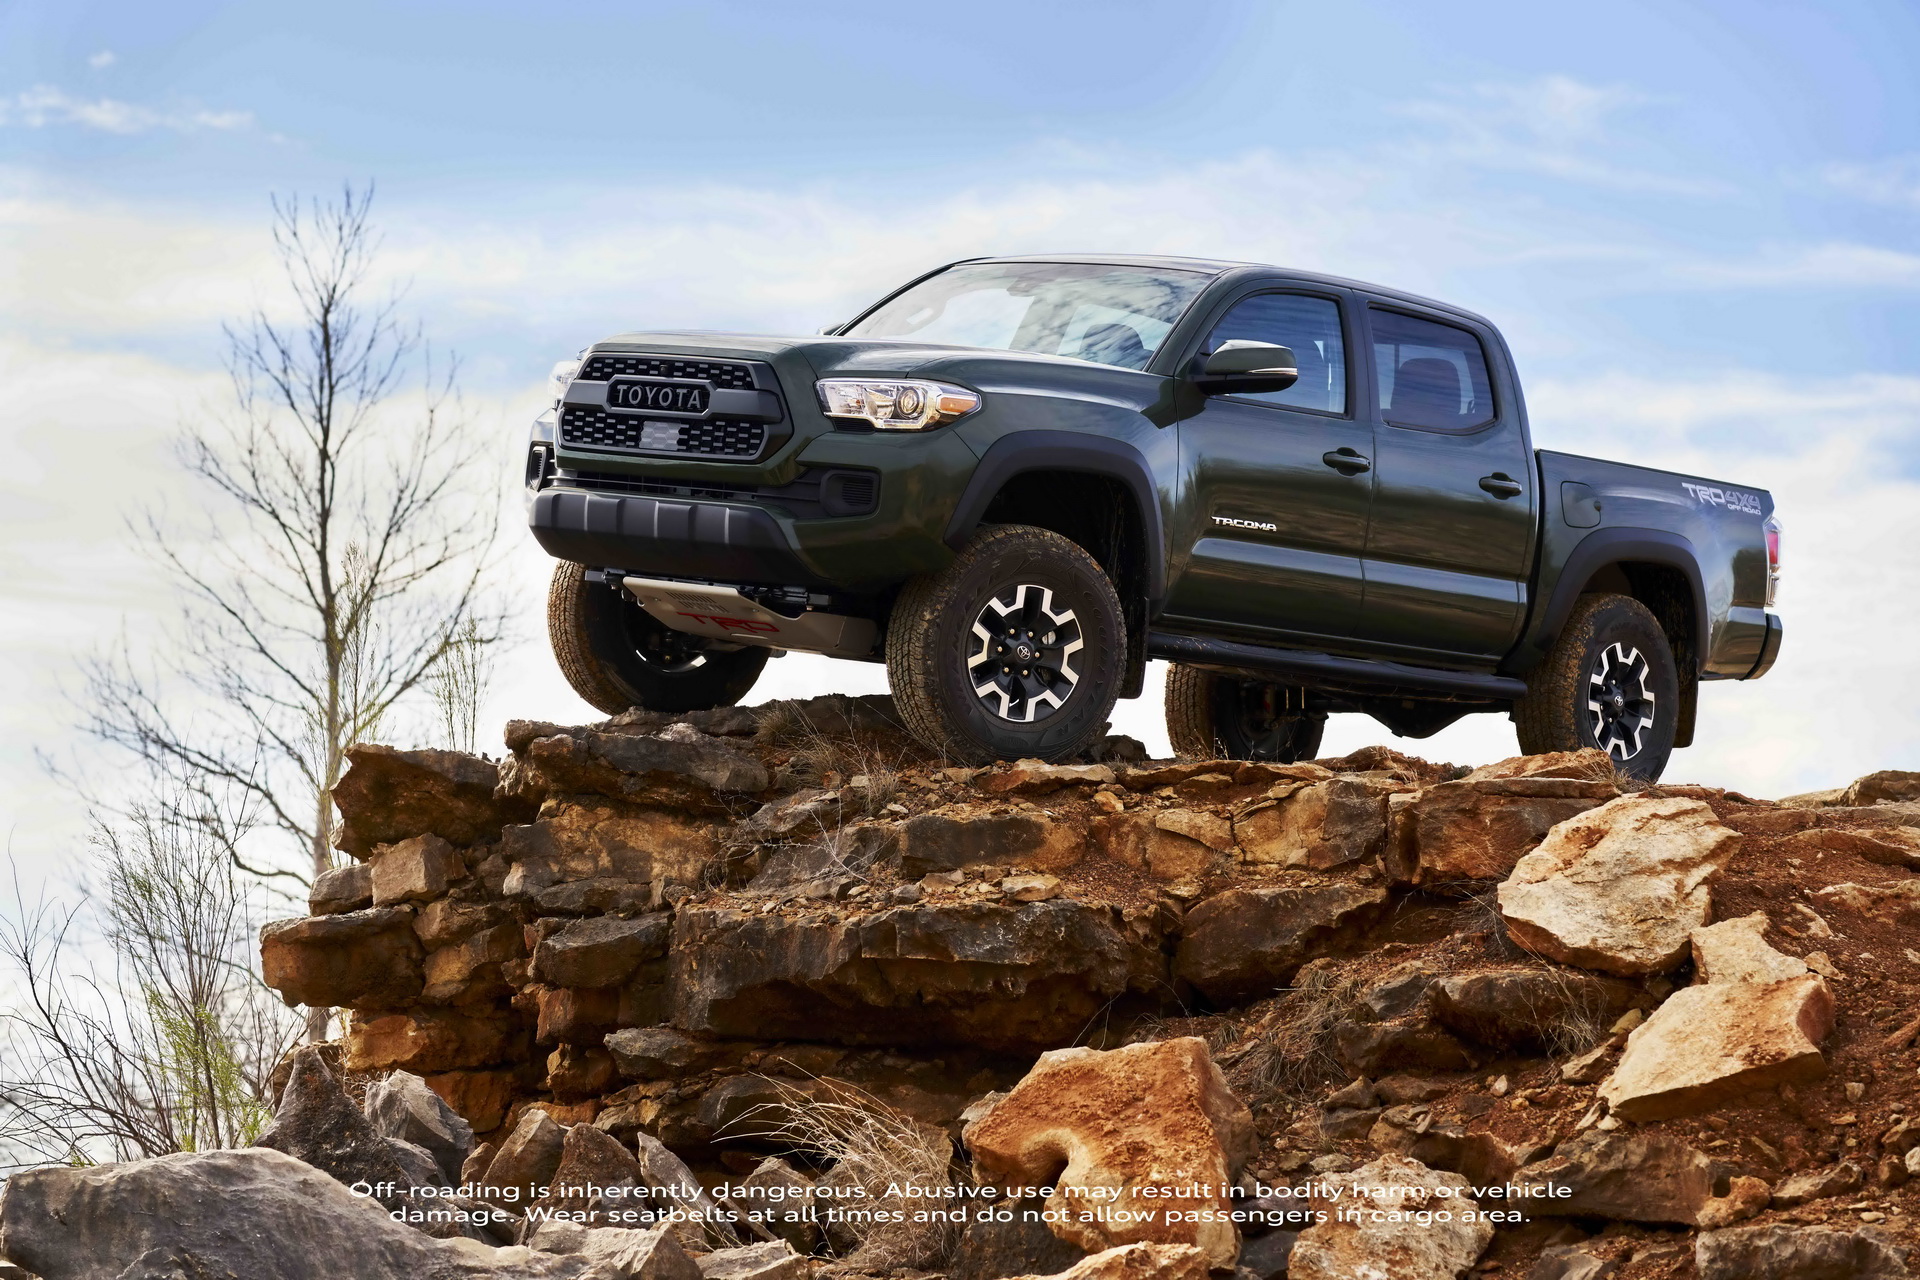 TRD Lift Kit Launched As Dealer-Installed Option For Toyota Tacoma